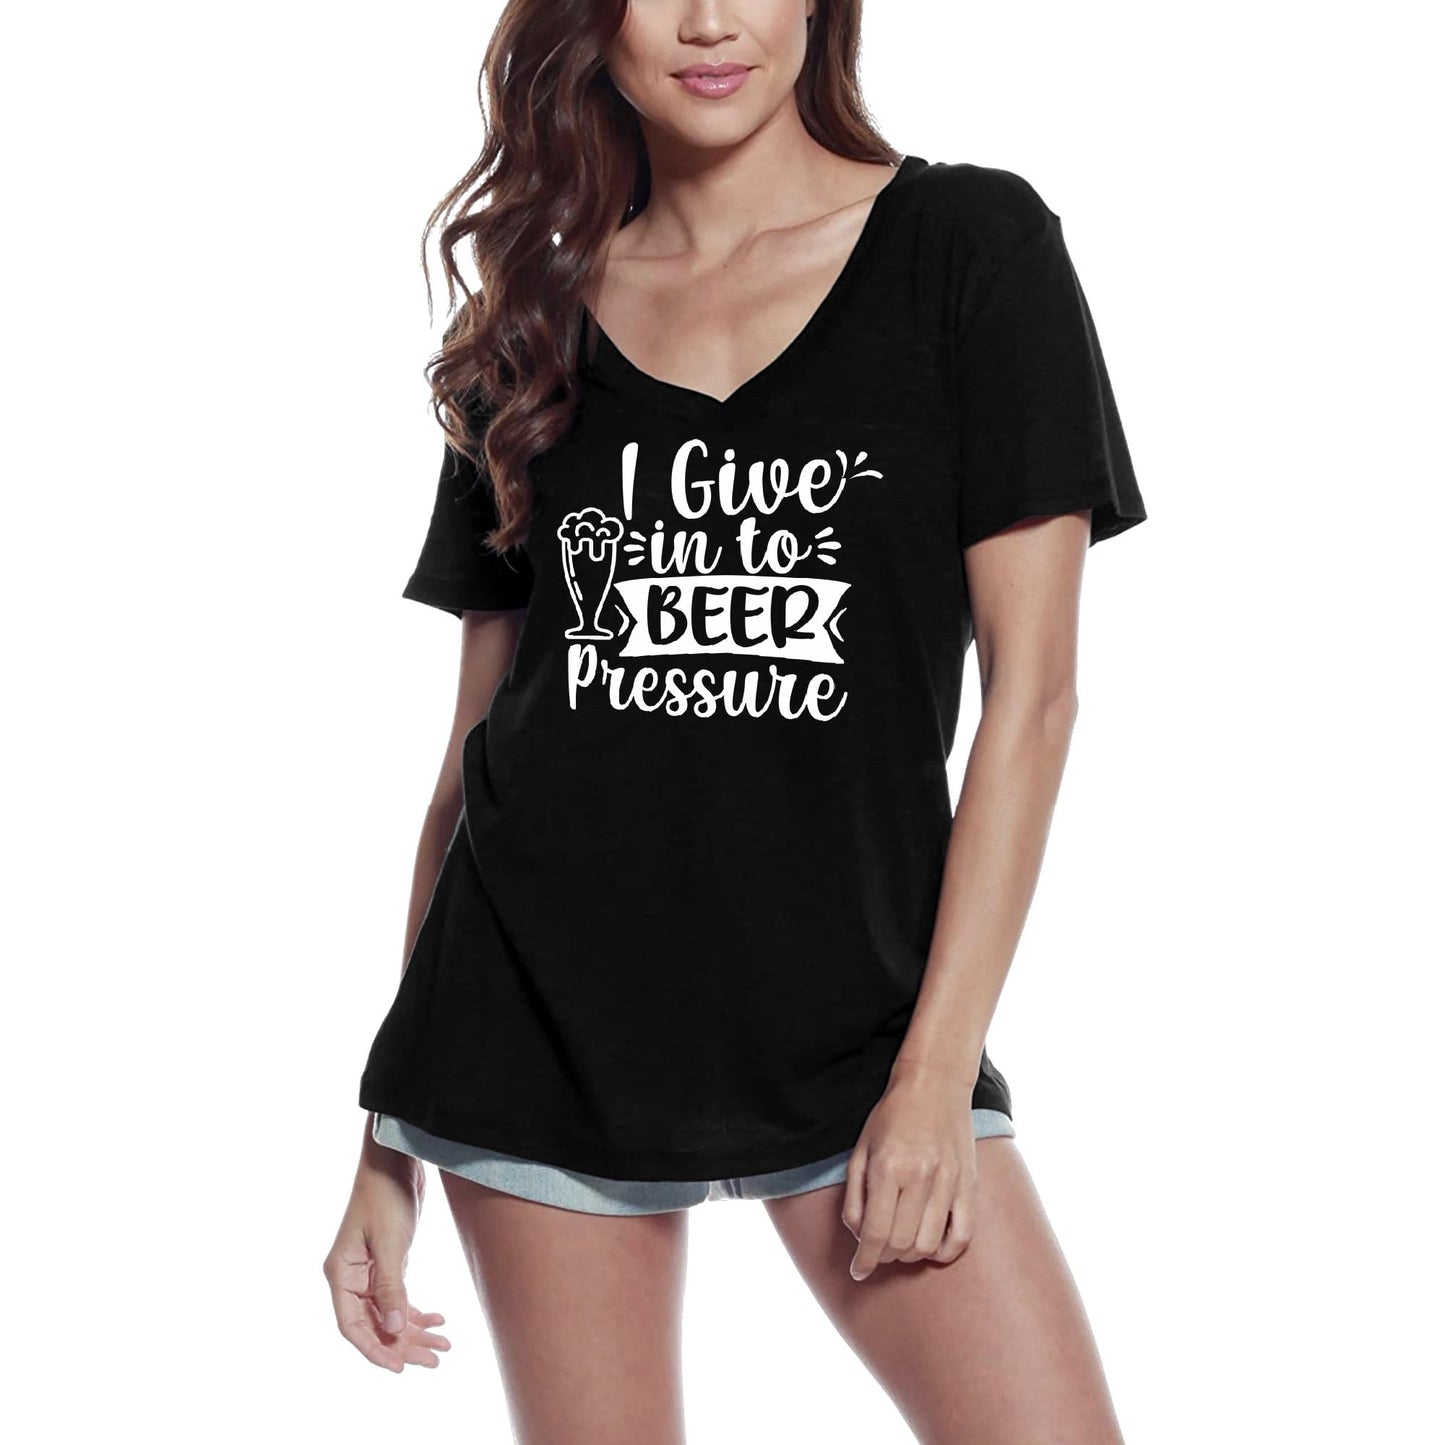 ULTRABASIC Women's T-Shirt I Give In to Beer Pressure - Funny Short Sleeve Tee Shirt